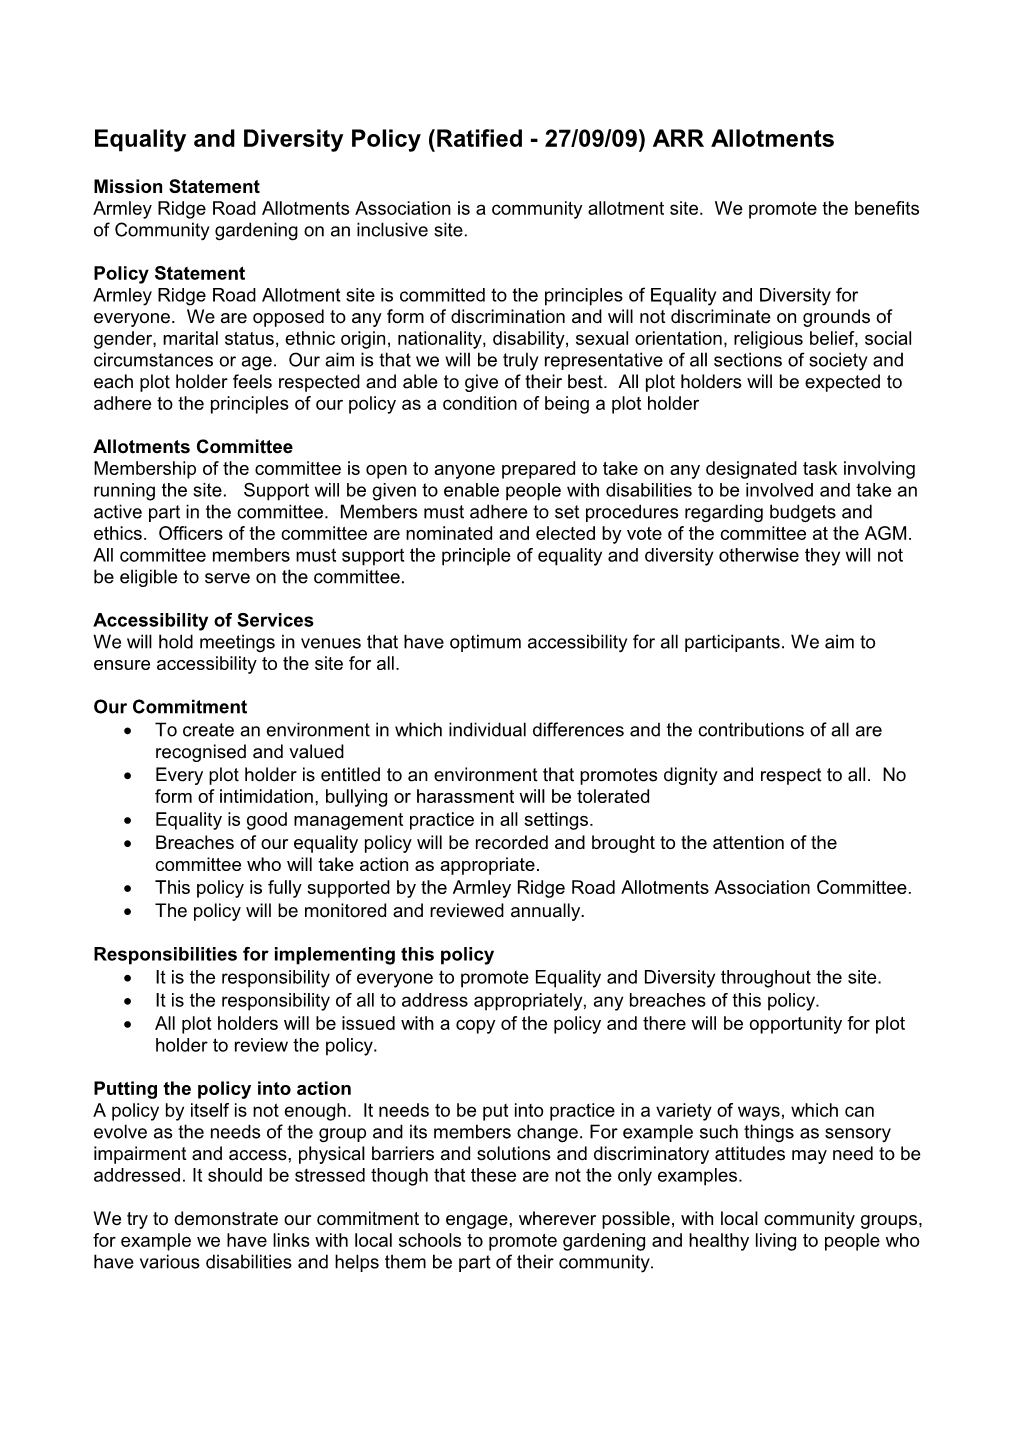 Equality and Diversity Policy (Ratified - 27/09/09) ARR Allotments